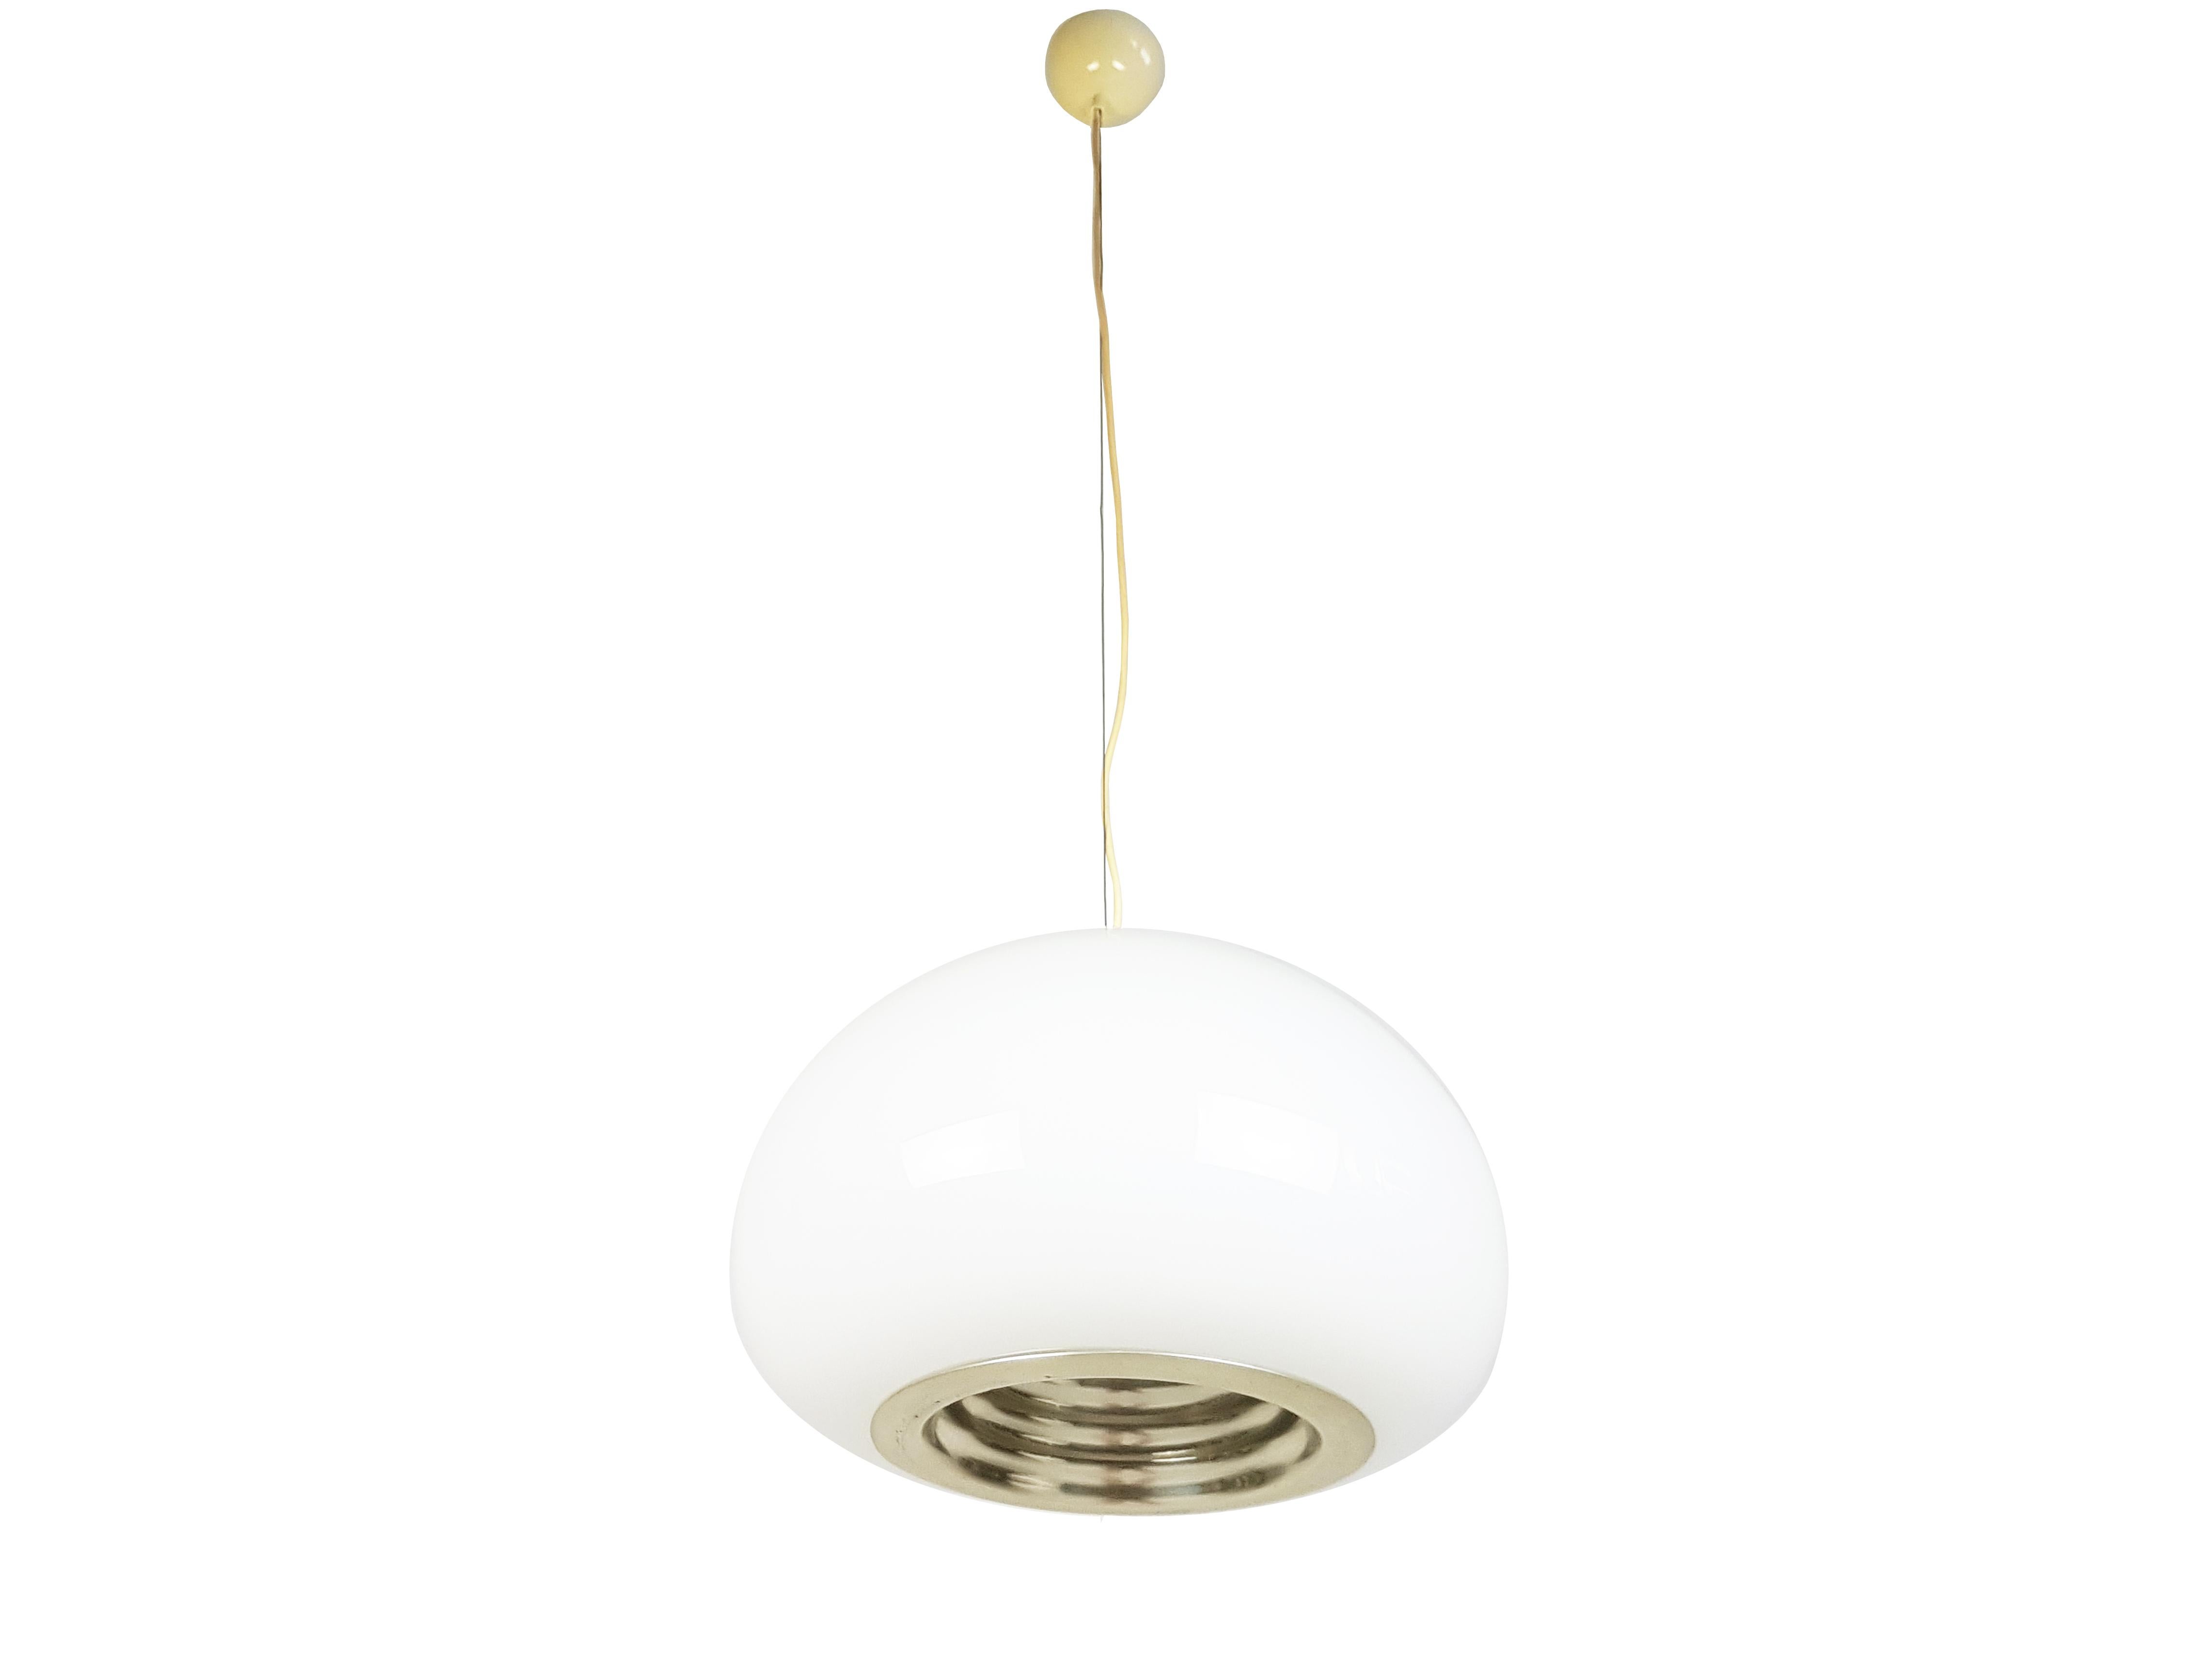 This out of production pendant was made from a white opaline glass shade with a shaped silver aluminum reflector. The lamp features 2 different illuminations: one diffused light from the 3 bulbs inside the glass shade; and one directed light from